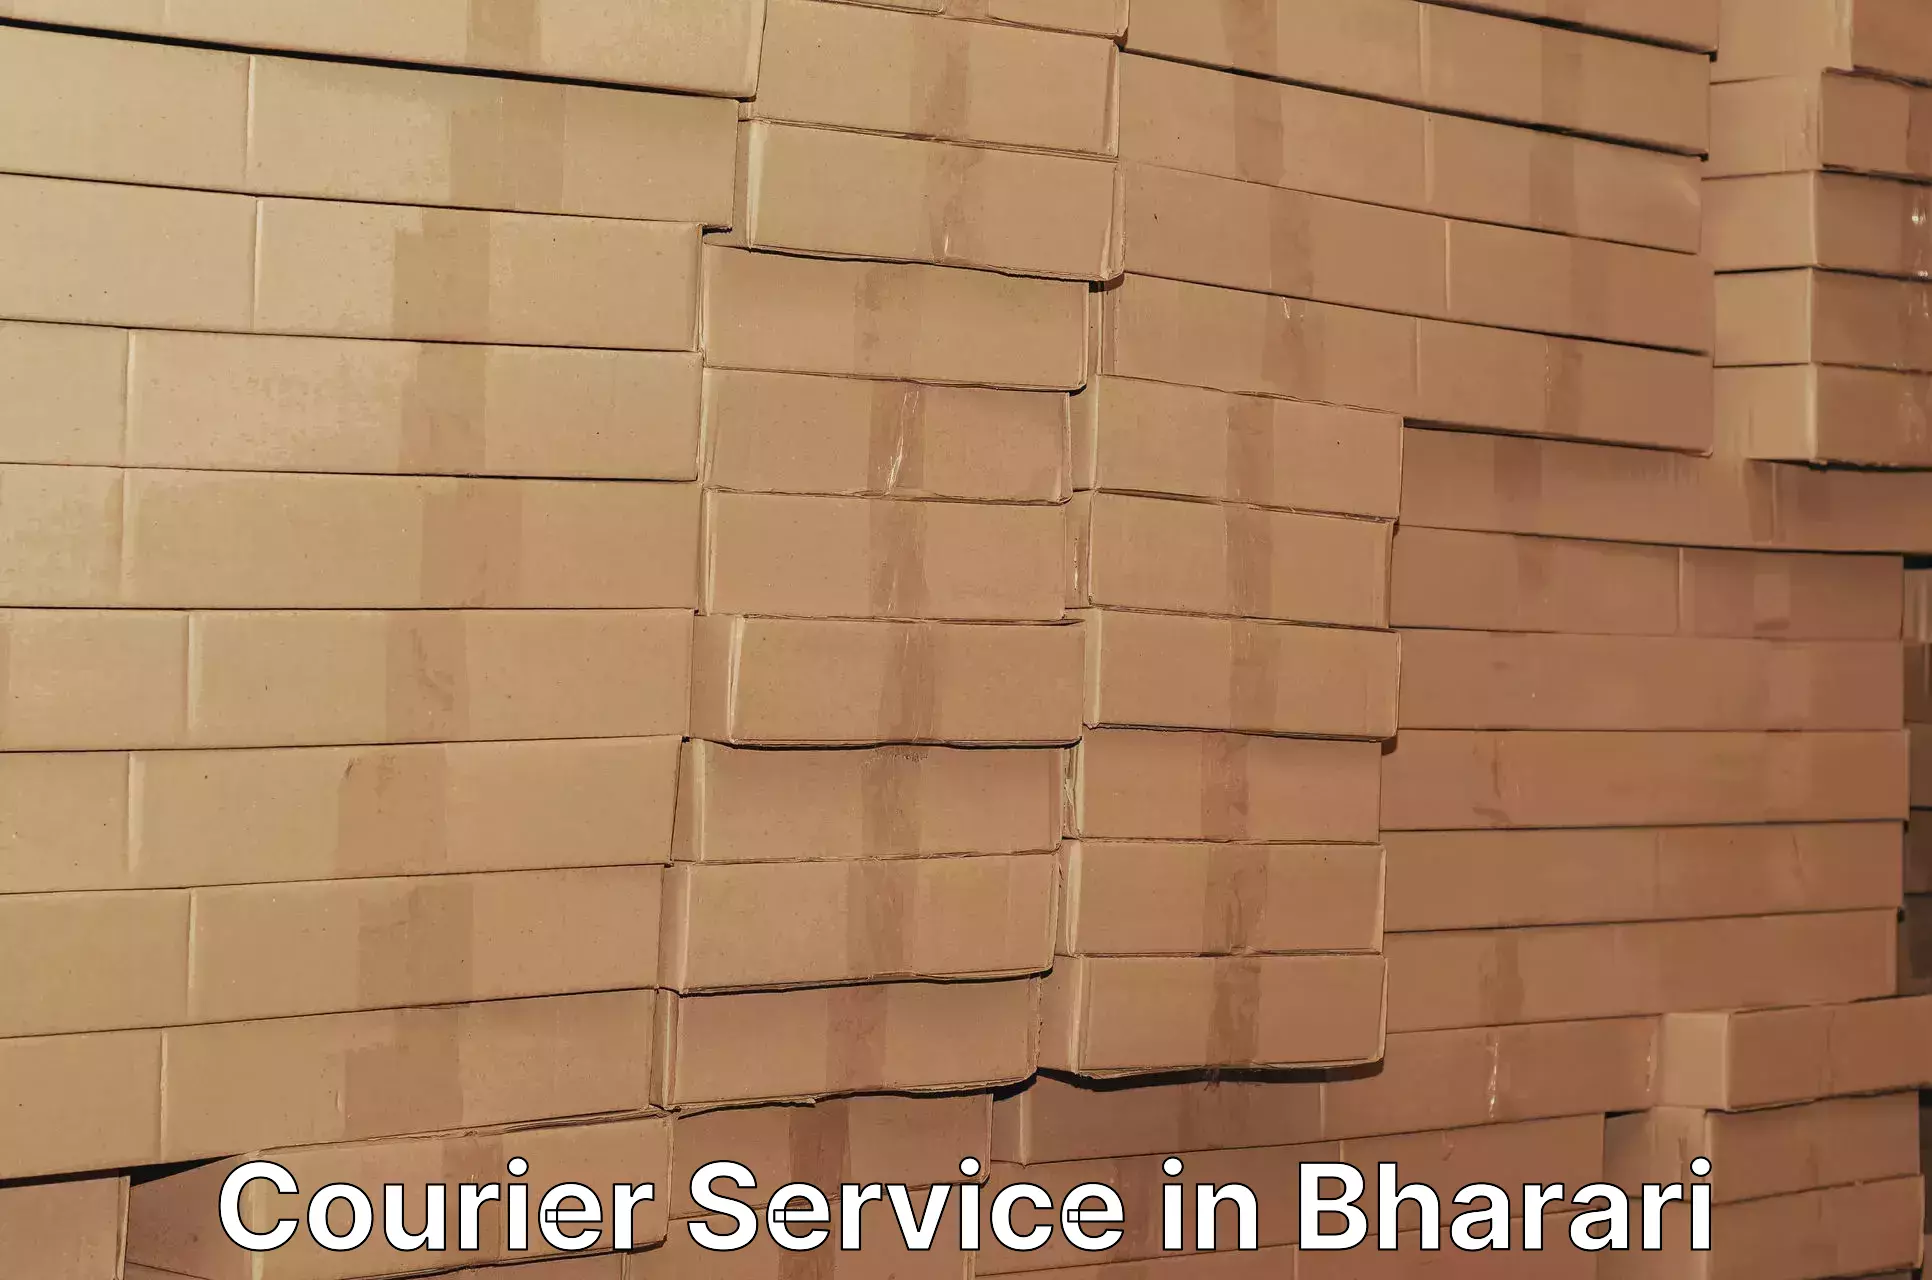 Global shipping solutions in Bharari